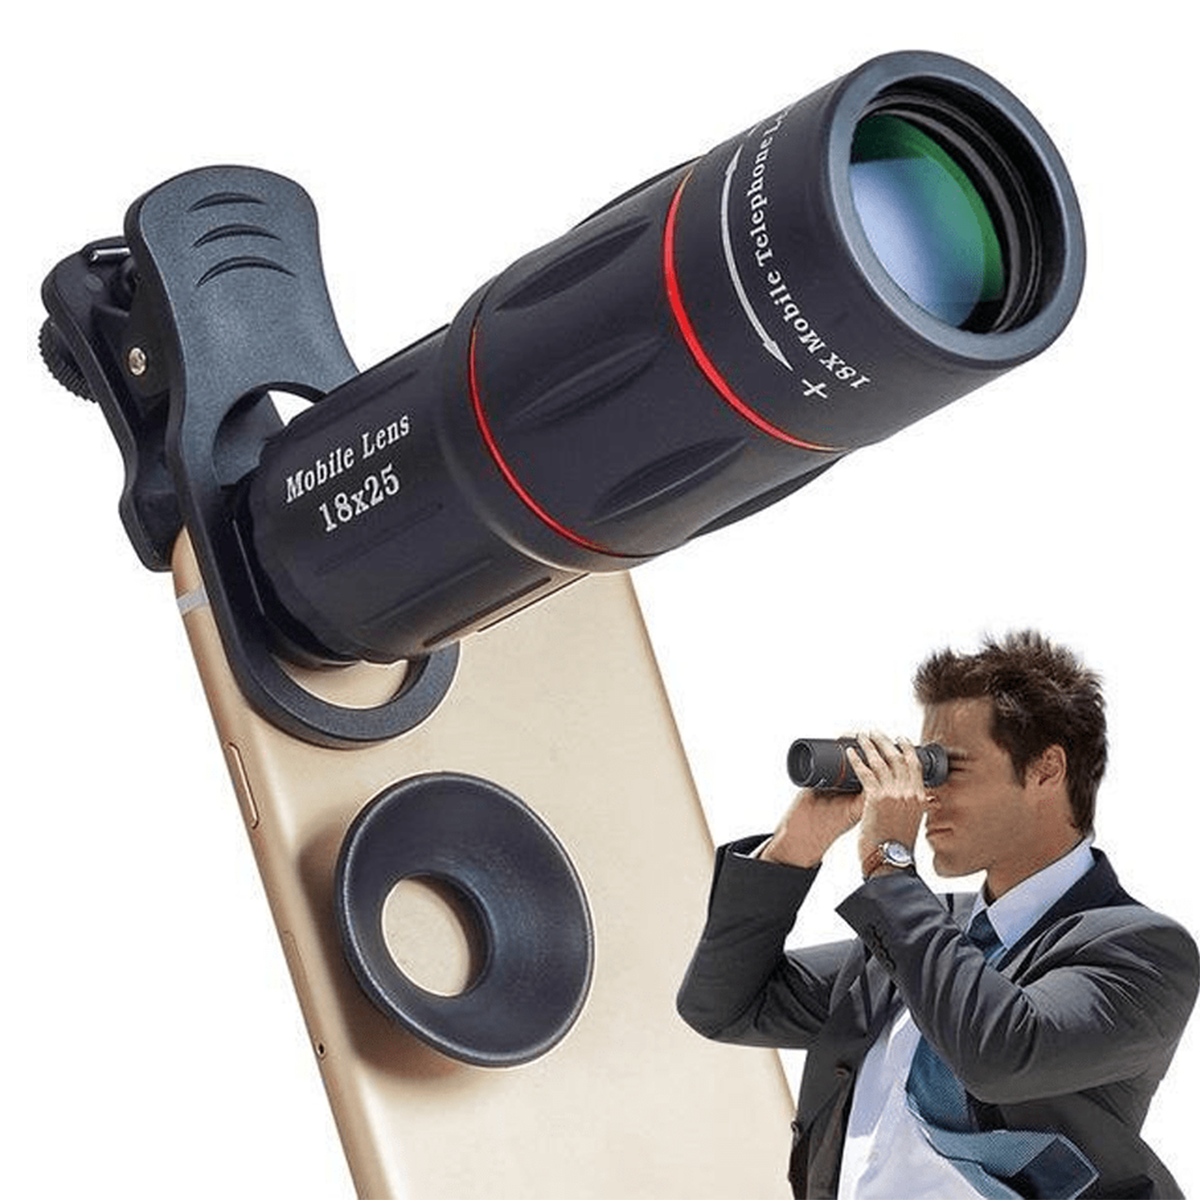 18x Telescope Zoom Mobile Phone Lens With Tripod